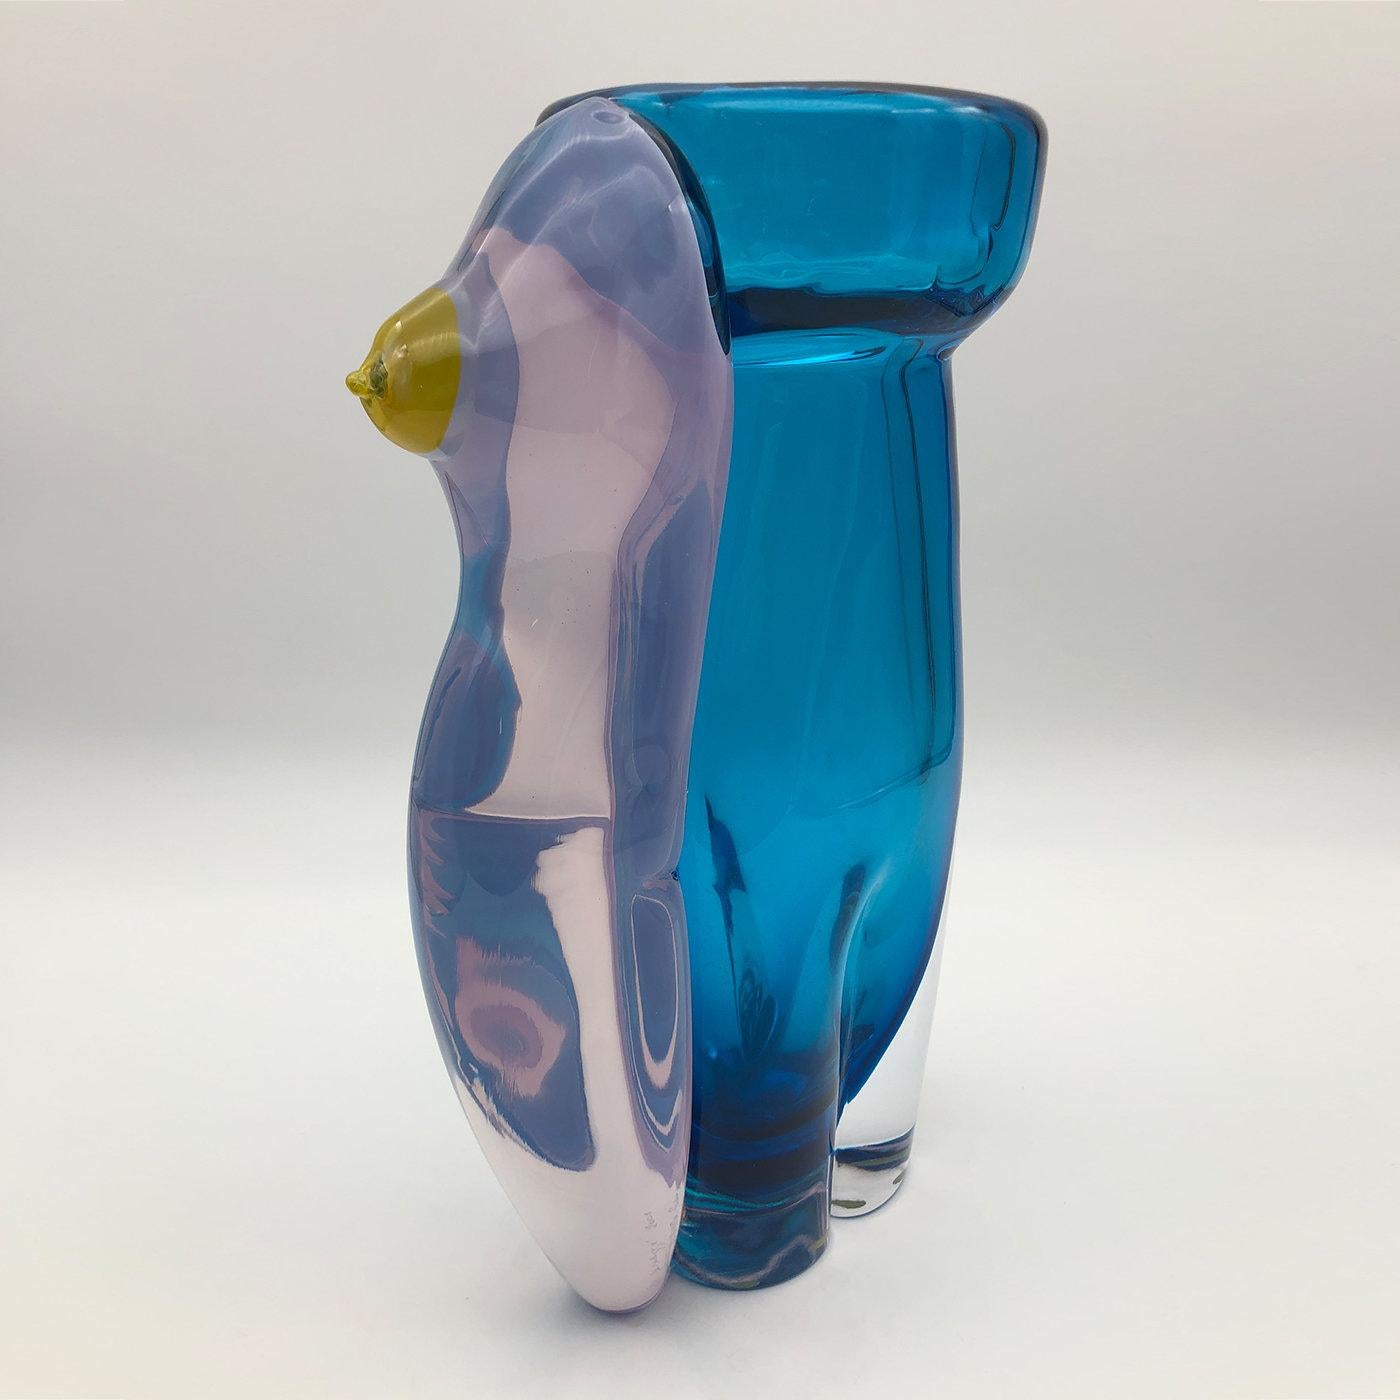 Named after the Greek God of Love, this magnificent vase will infuse a charming accent of contemporary flair in any decor. Deftly handcrafted by master glassmaker Toso Cristiano, it is fashioned of opaline ruby glass and aquamarine clear glass,